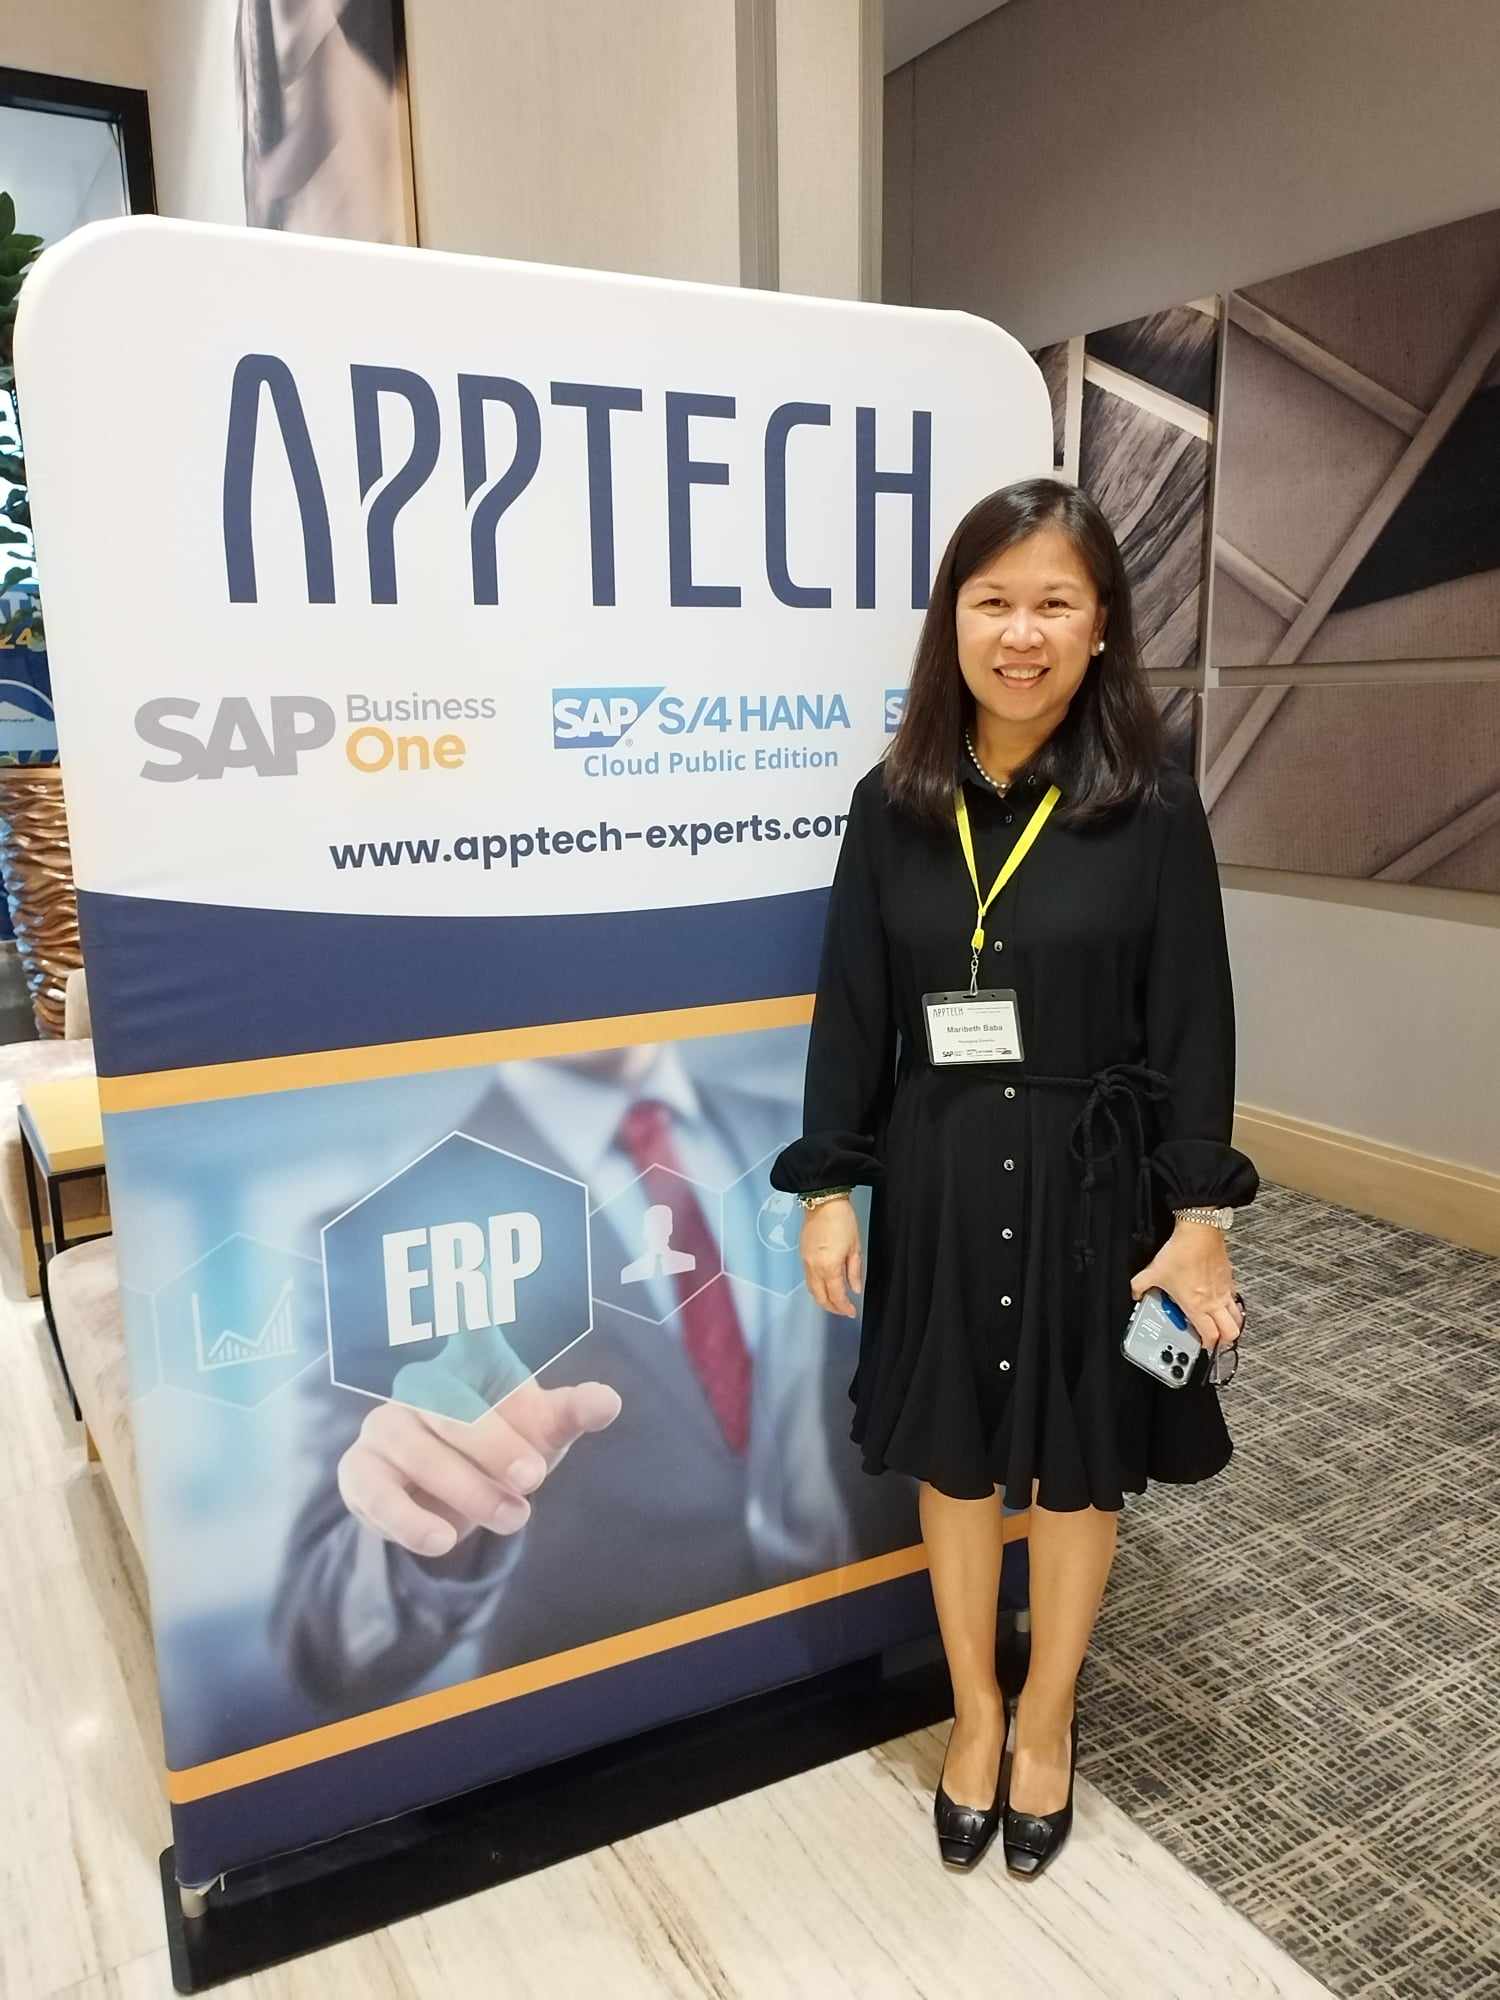 APPTECH shares innovations in SAP solutions – Cebu Online News Press Corps